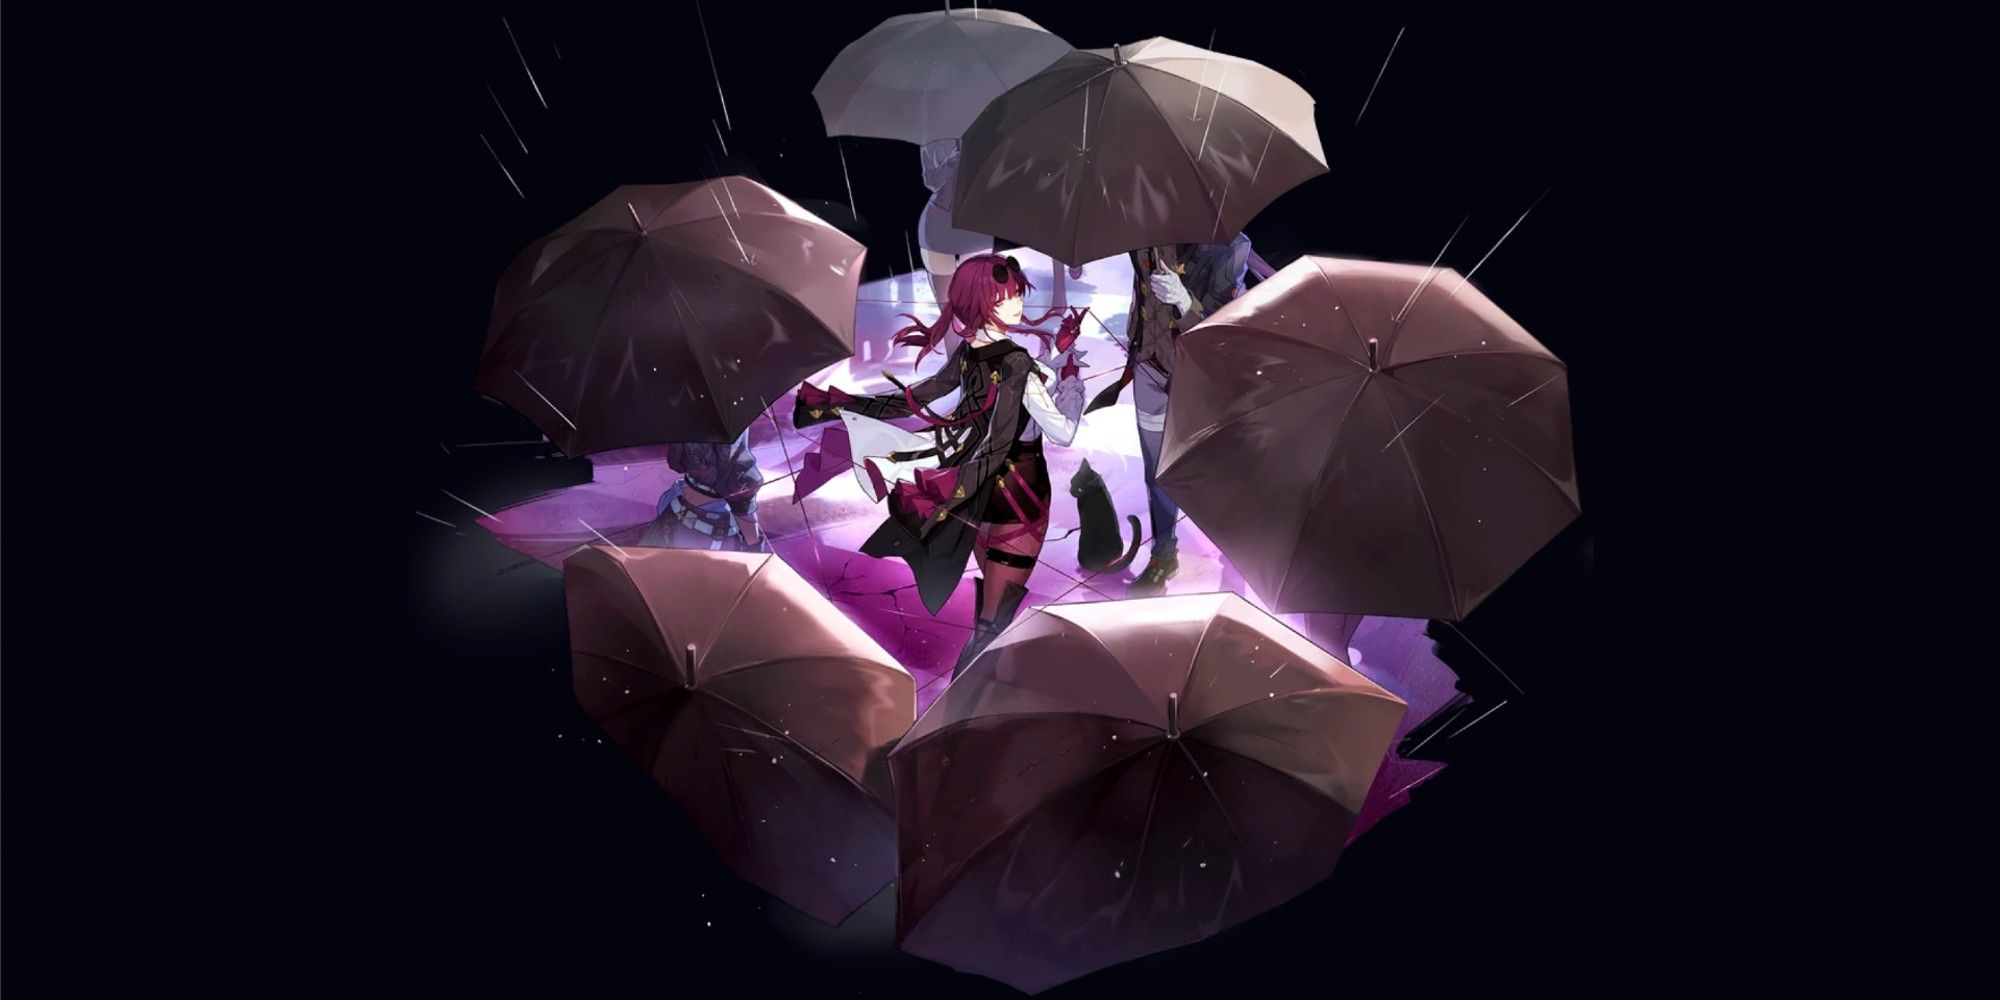 Kafka stands in the rain while surrounded by umbrellas. Silver Wolf and Welt can be seen, but are somewhat obscured